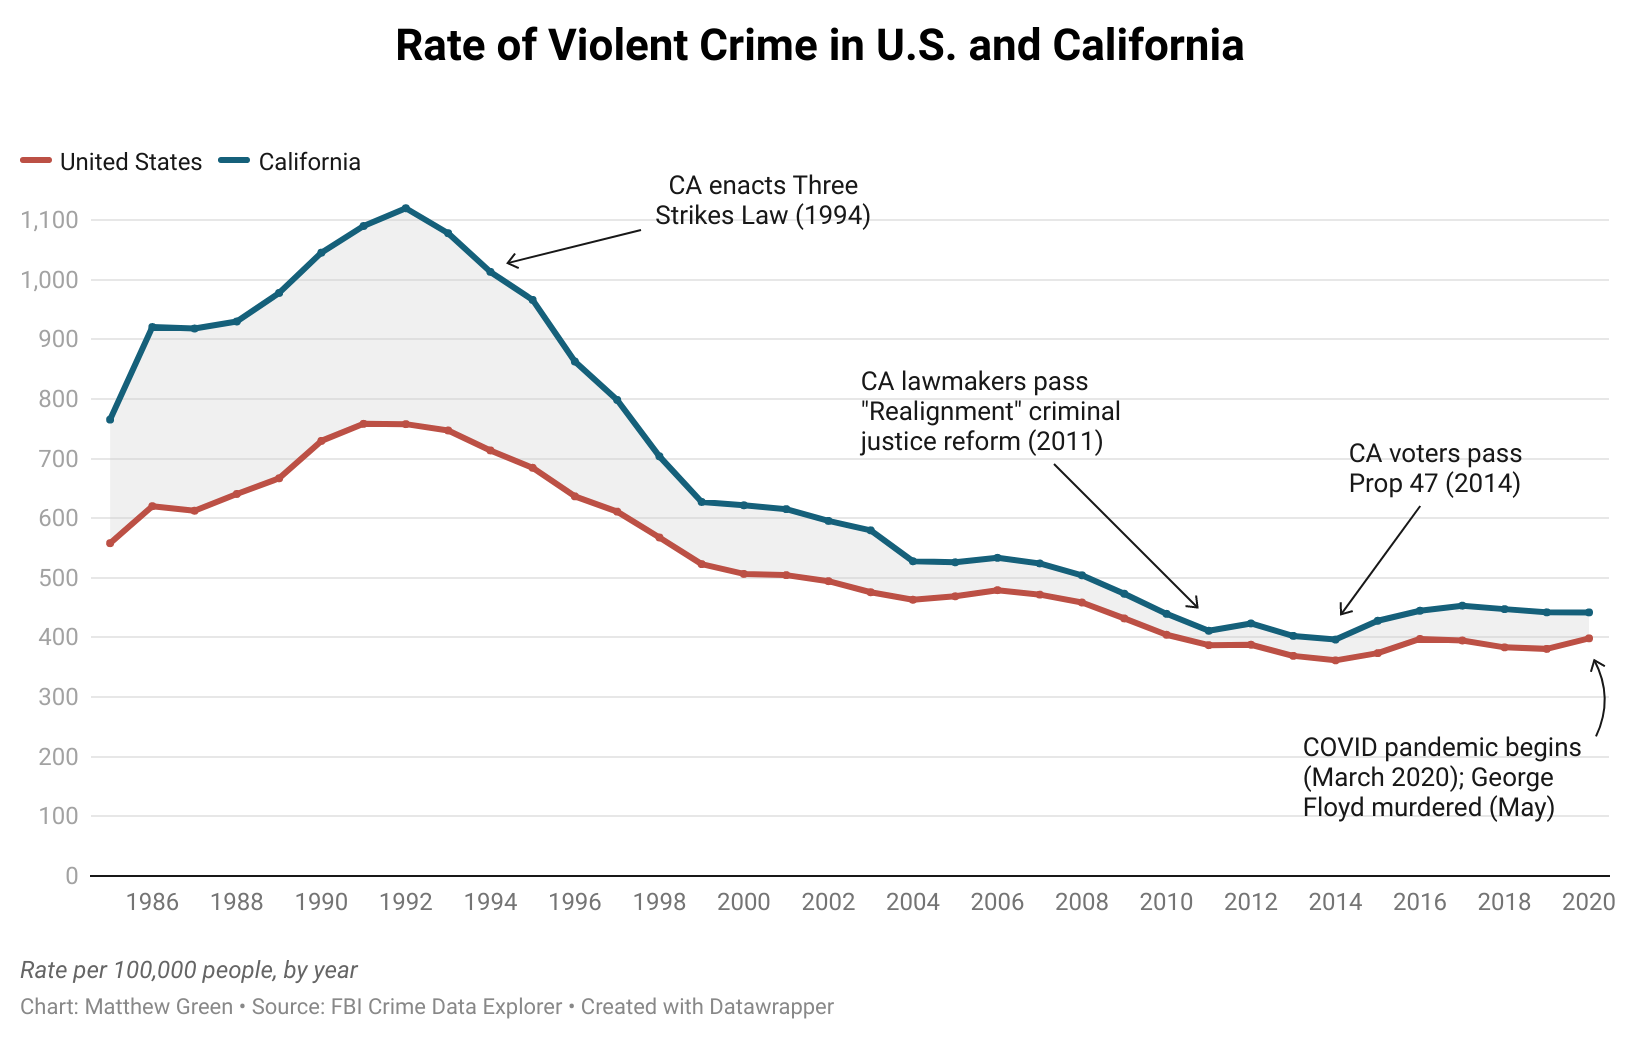 A line chart of violent crime rates in the U.S. and California since 1986